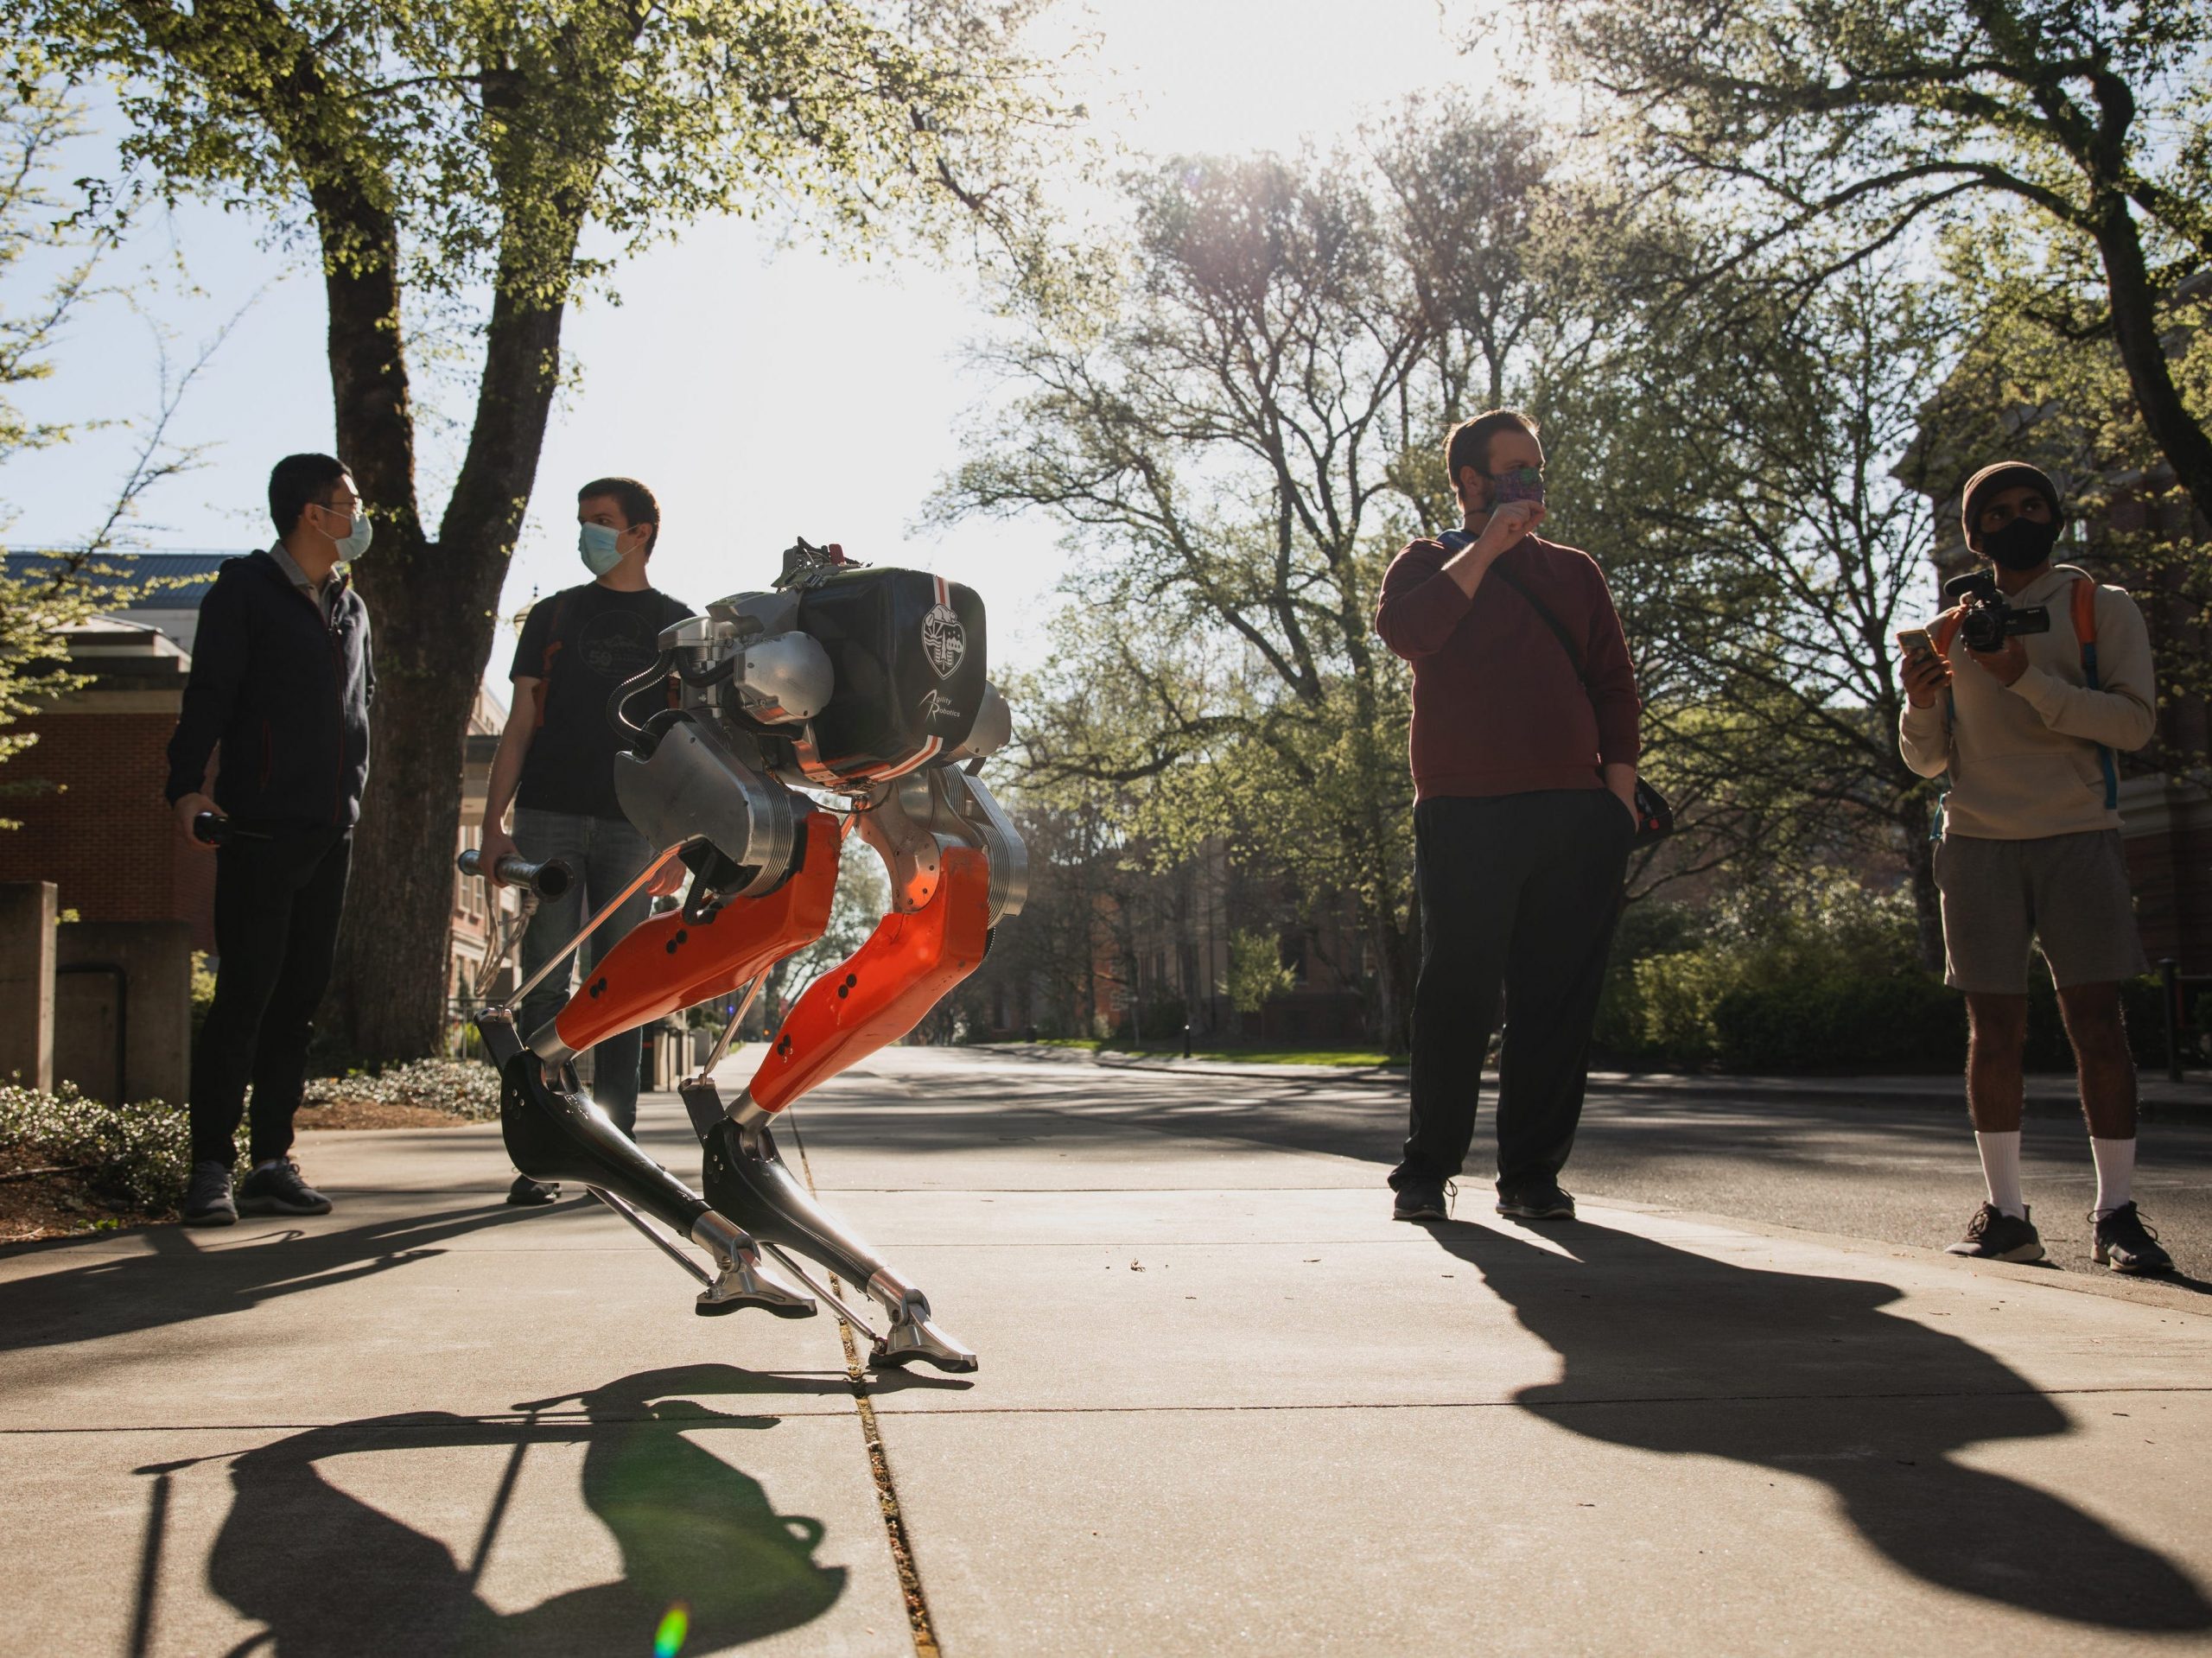 a bipedal robot named Cassie running a 5K outdoors with trees and four people in the background